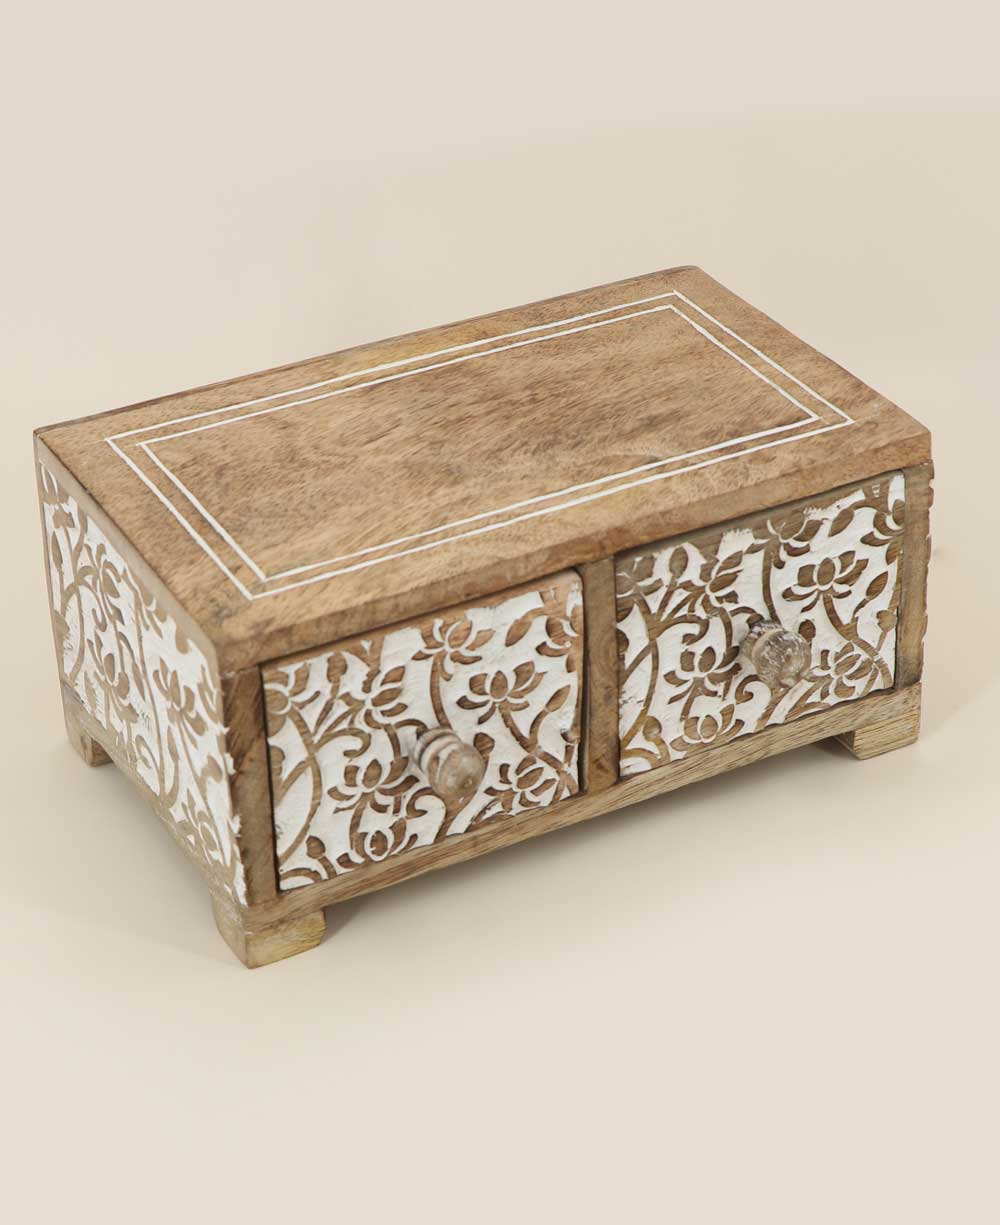 Small Tabletop Carved Wood Lotus Pedestal Riser With Drawers - Computer Risers & Stands - -